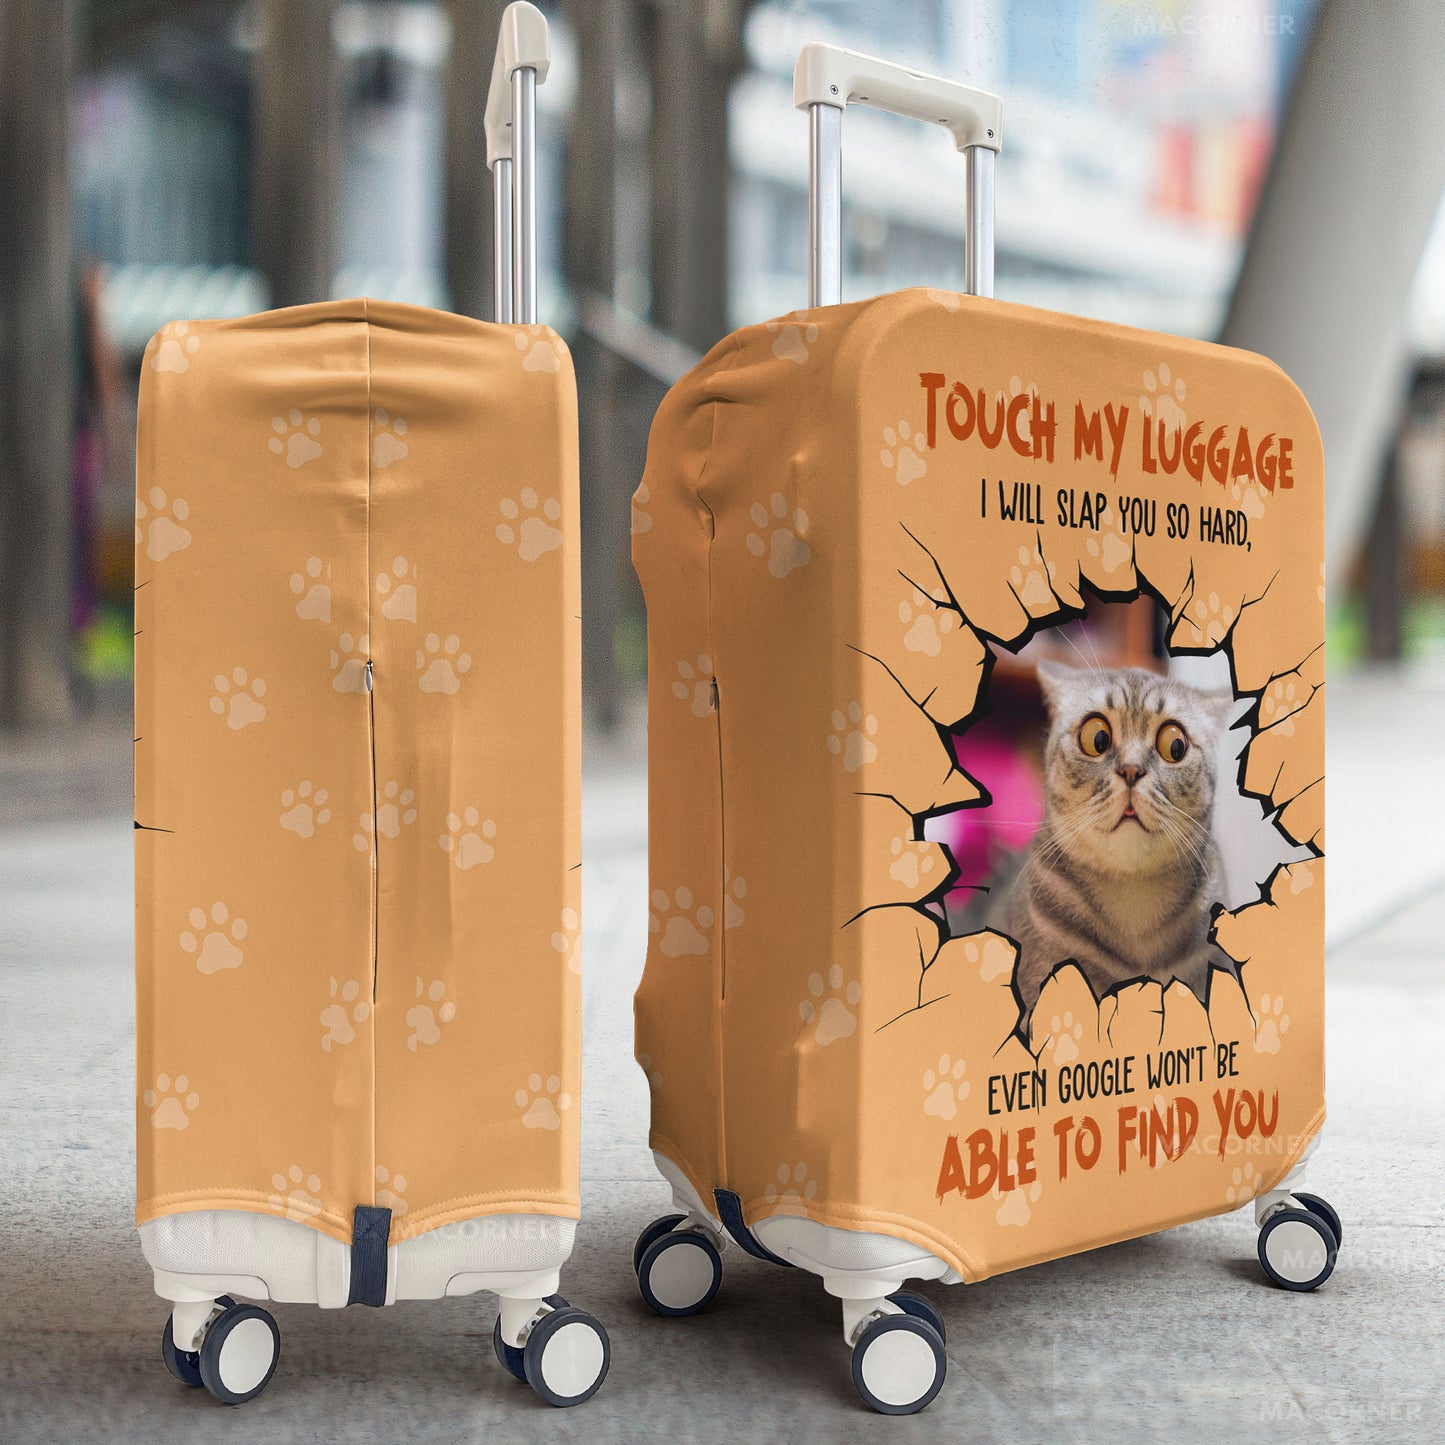 Custom Photo Touch My Luggage - Personalized Photo Luggage Cover